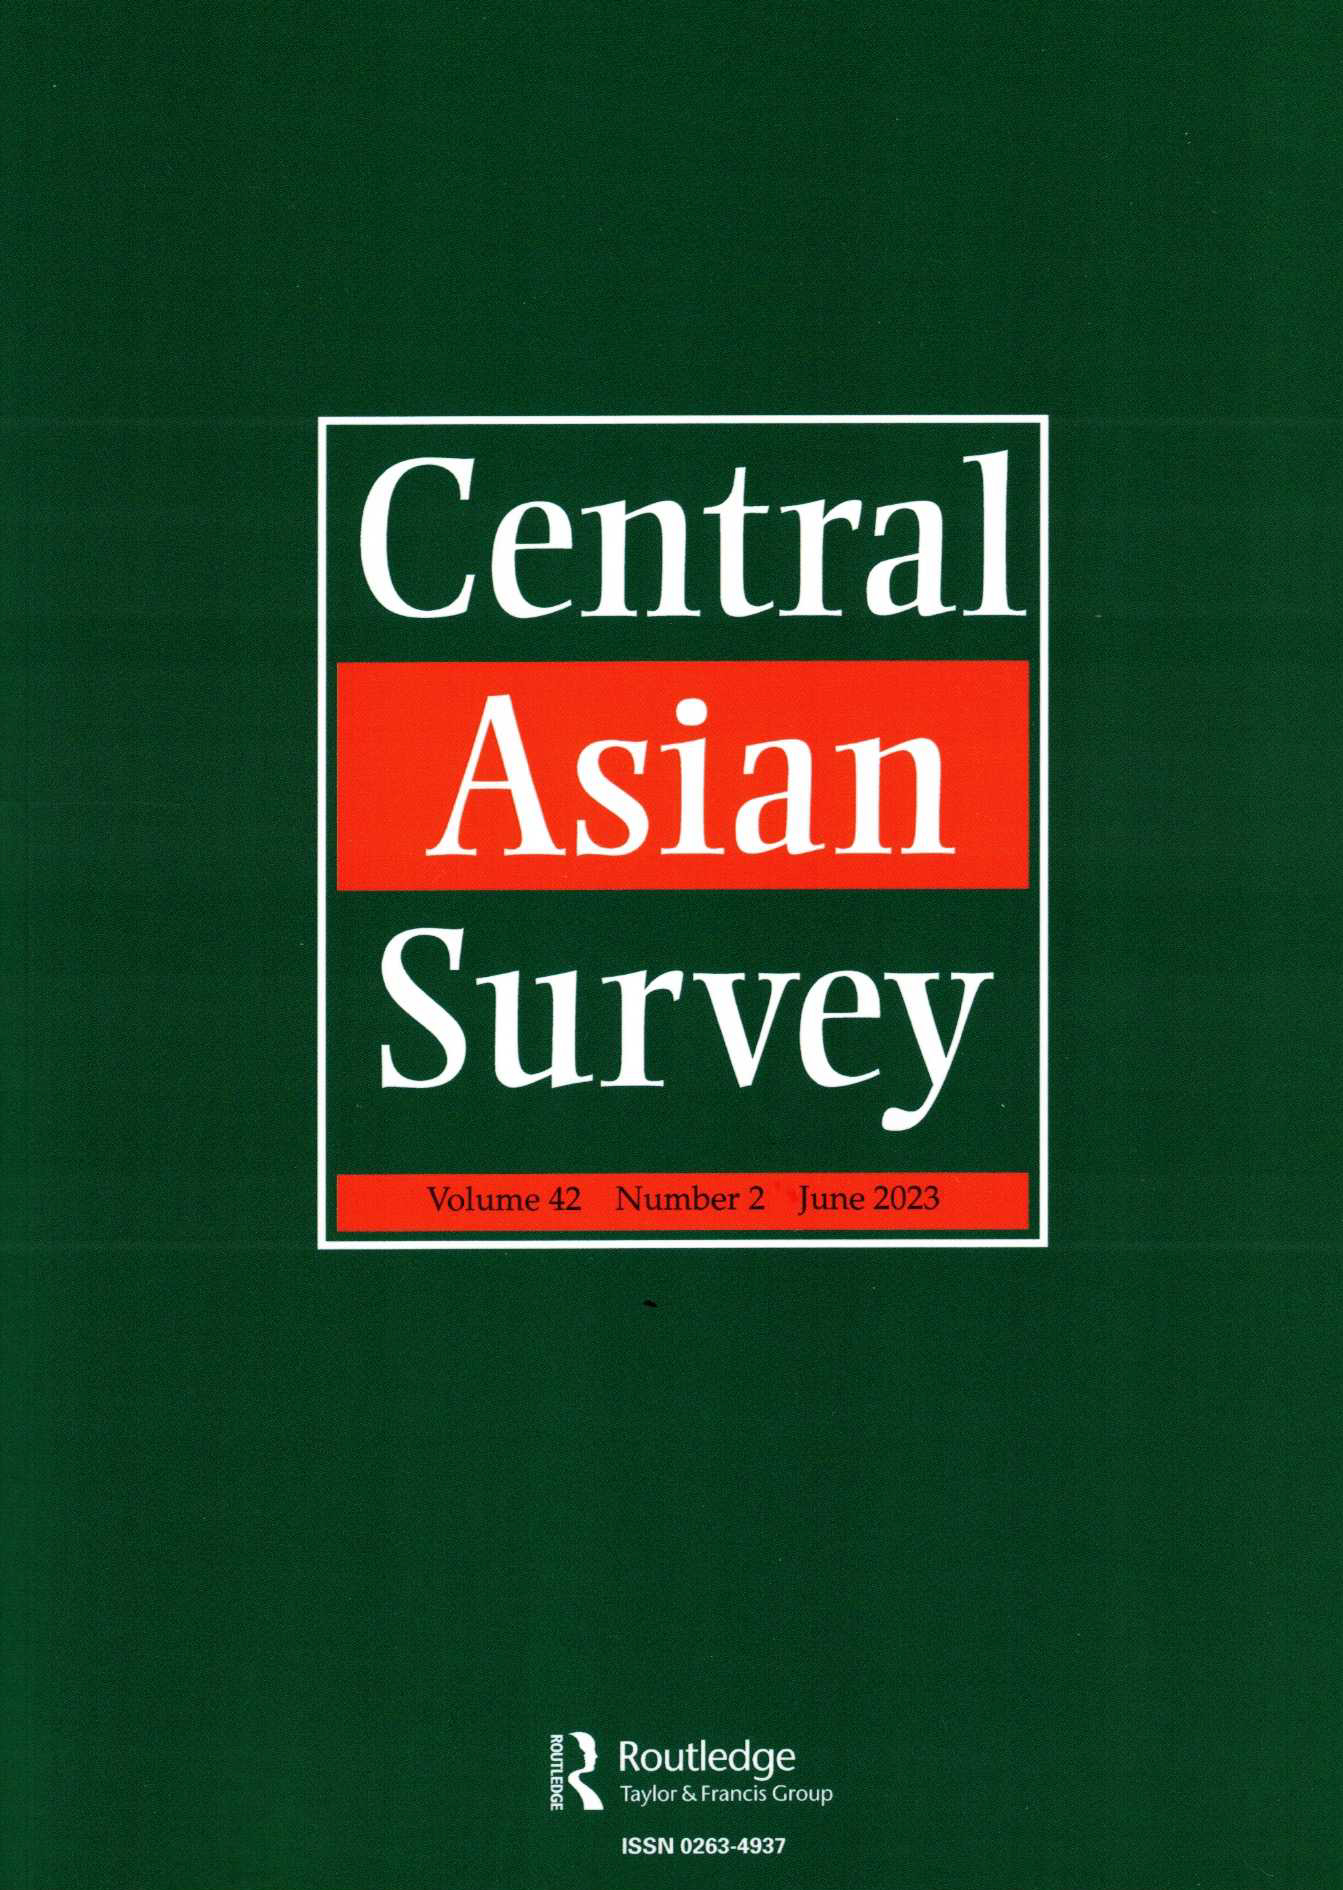 A green and red cover of the journal, Central Asian Survey 